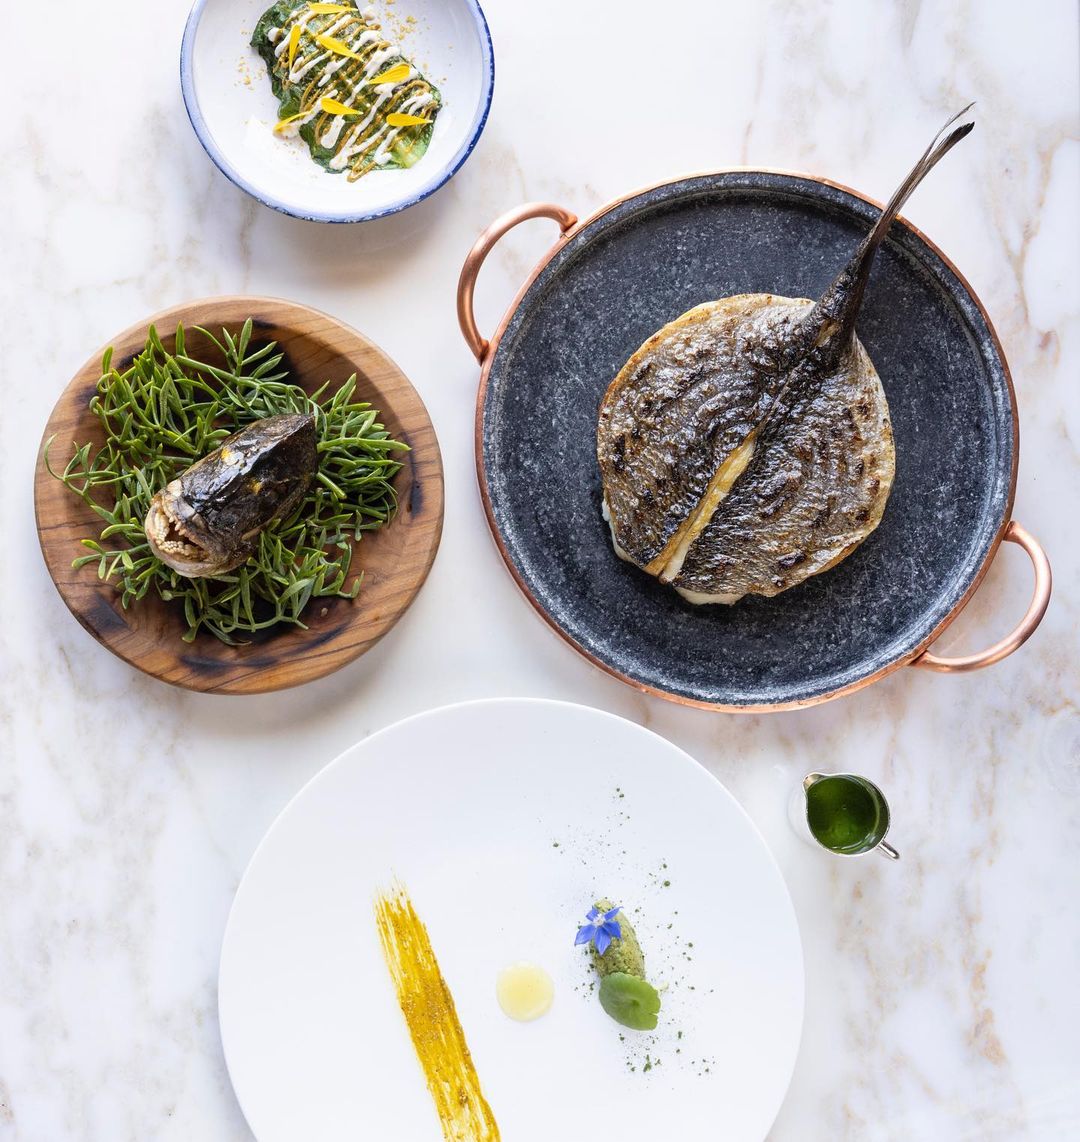 Grilled locally-caught fish and oysters from Maison Giol by chef Emmanuel Pilon for the 3-Michelin-star Le Louis XV - Alain Ducasse